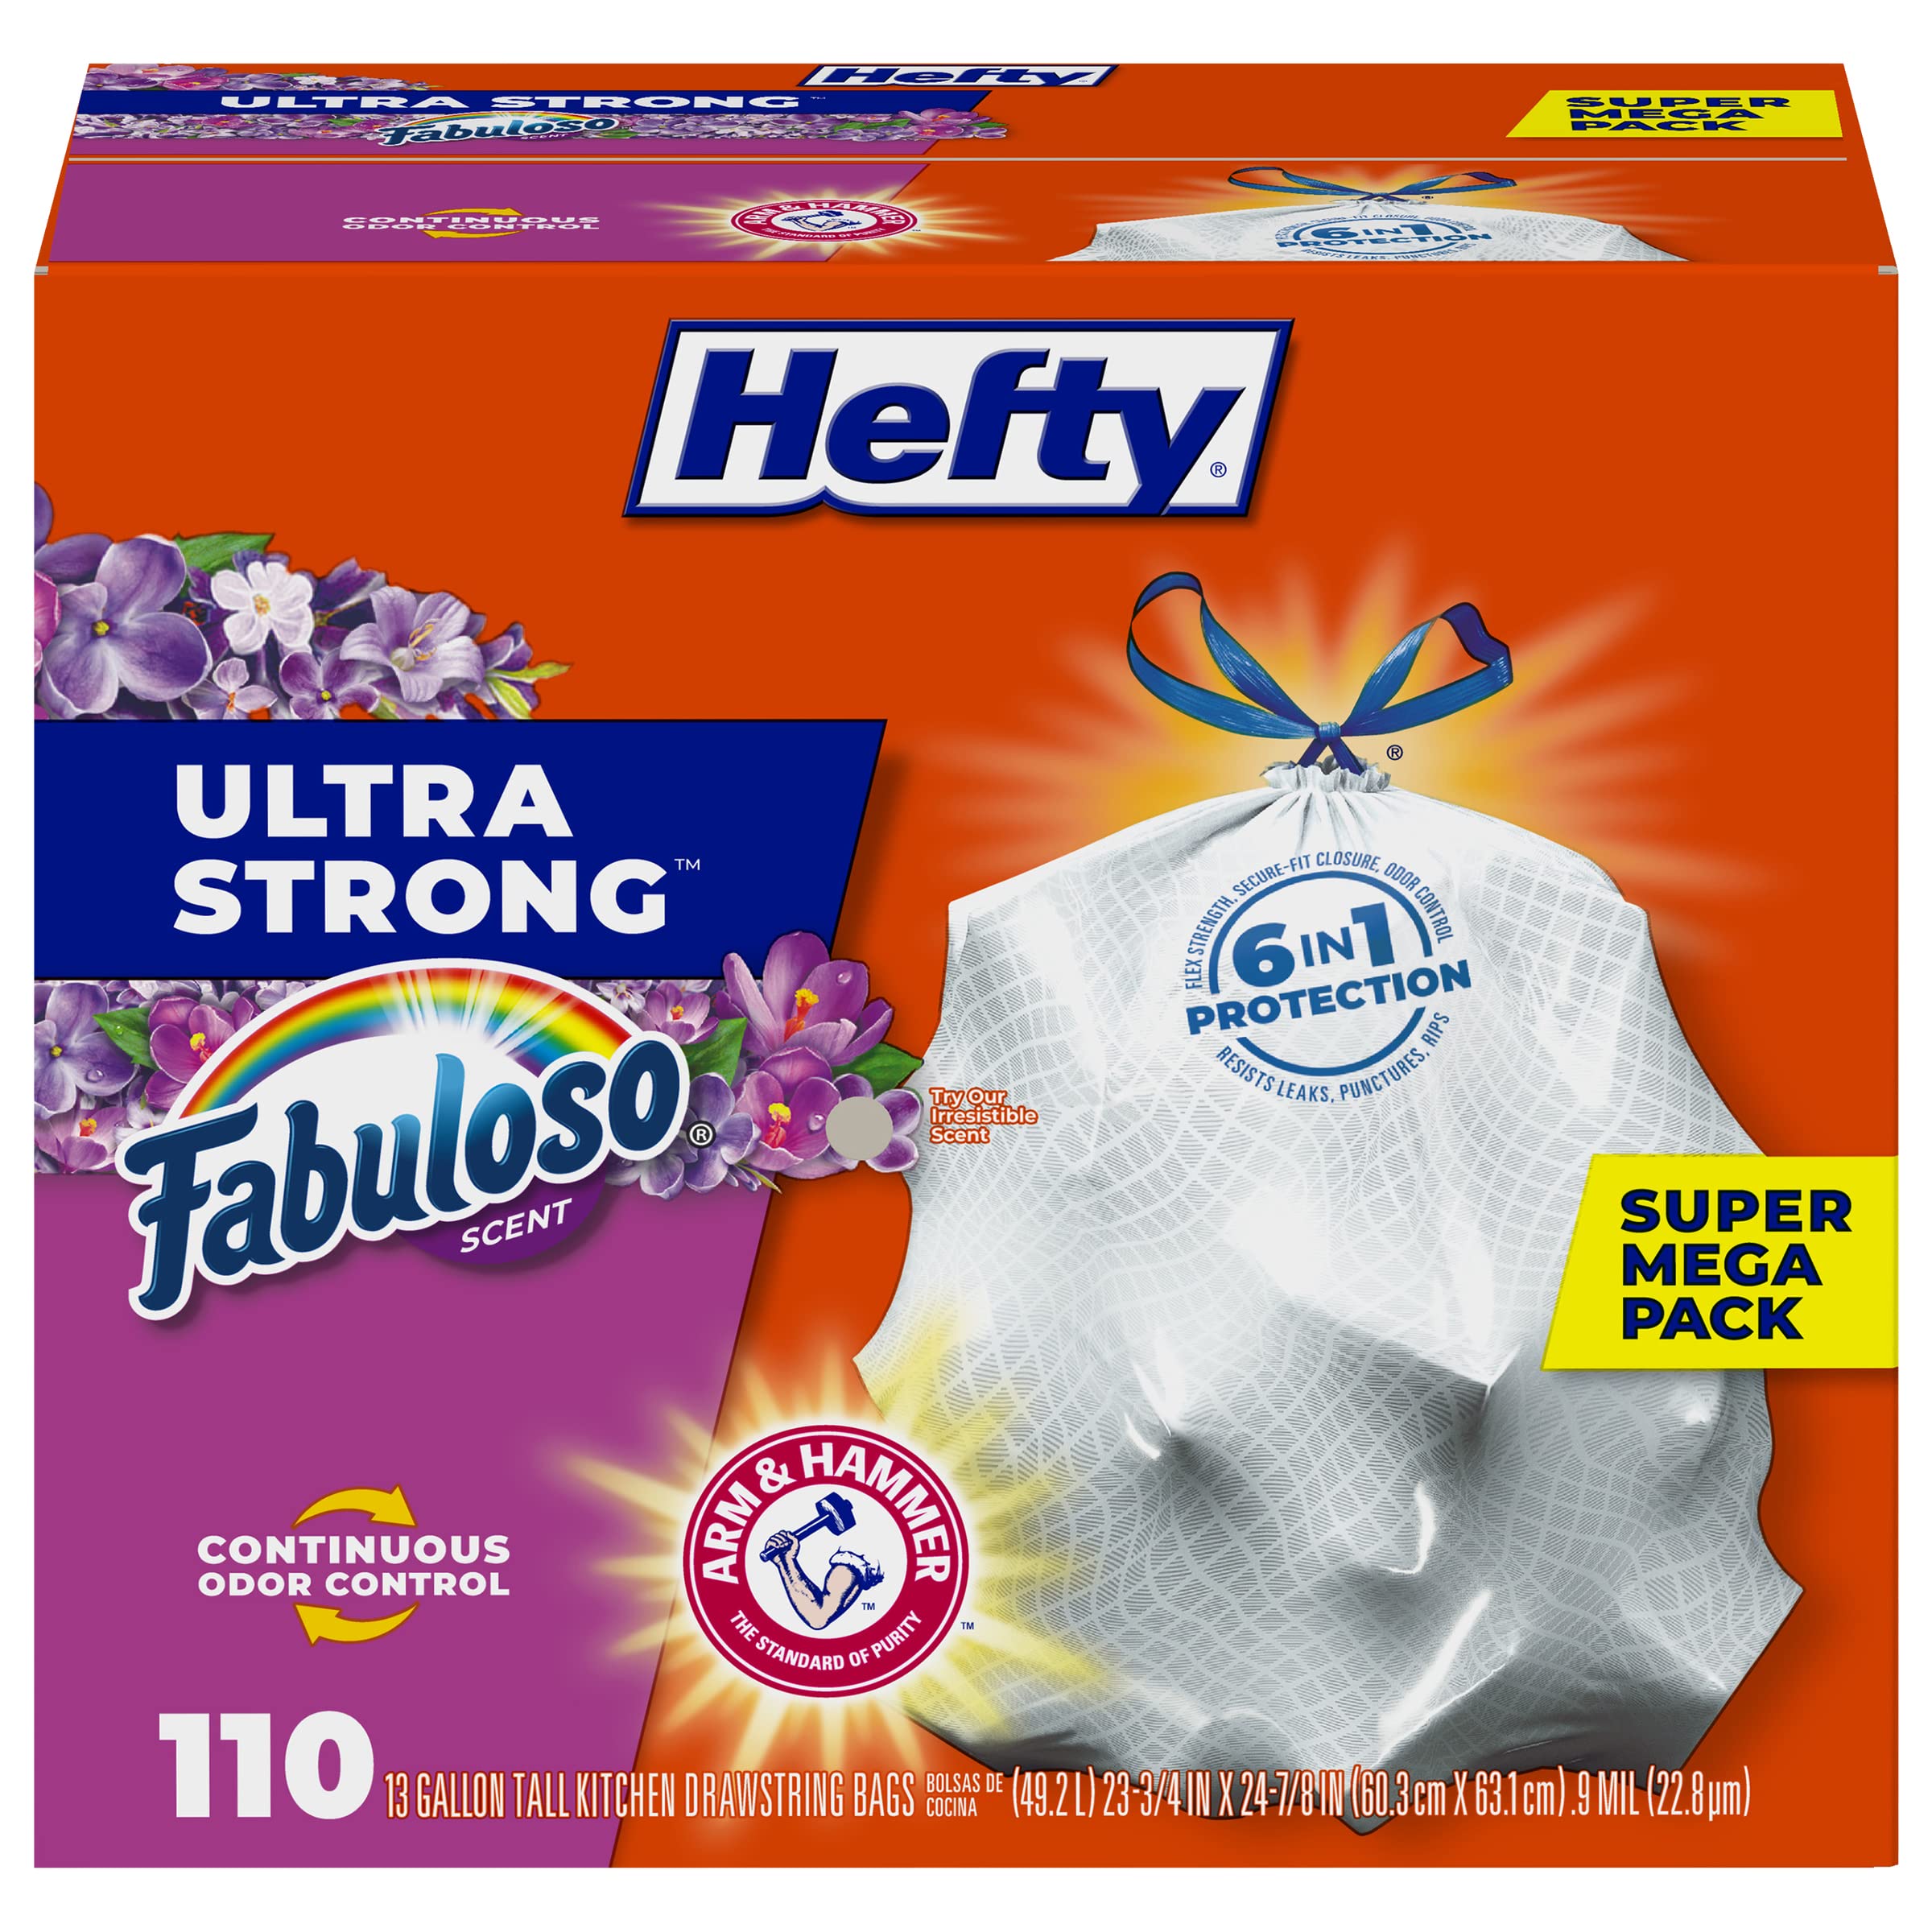  Hefty Ultra Strong Tall Kitchen Trash Bags, Fabuloso Scent, 13  Gallon, 110 Count : Health & Household